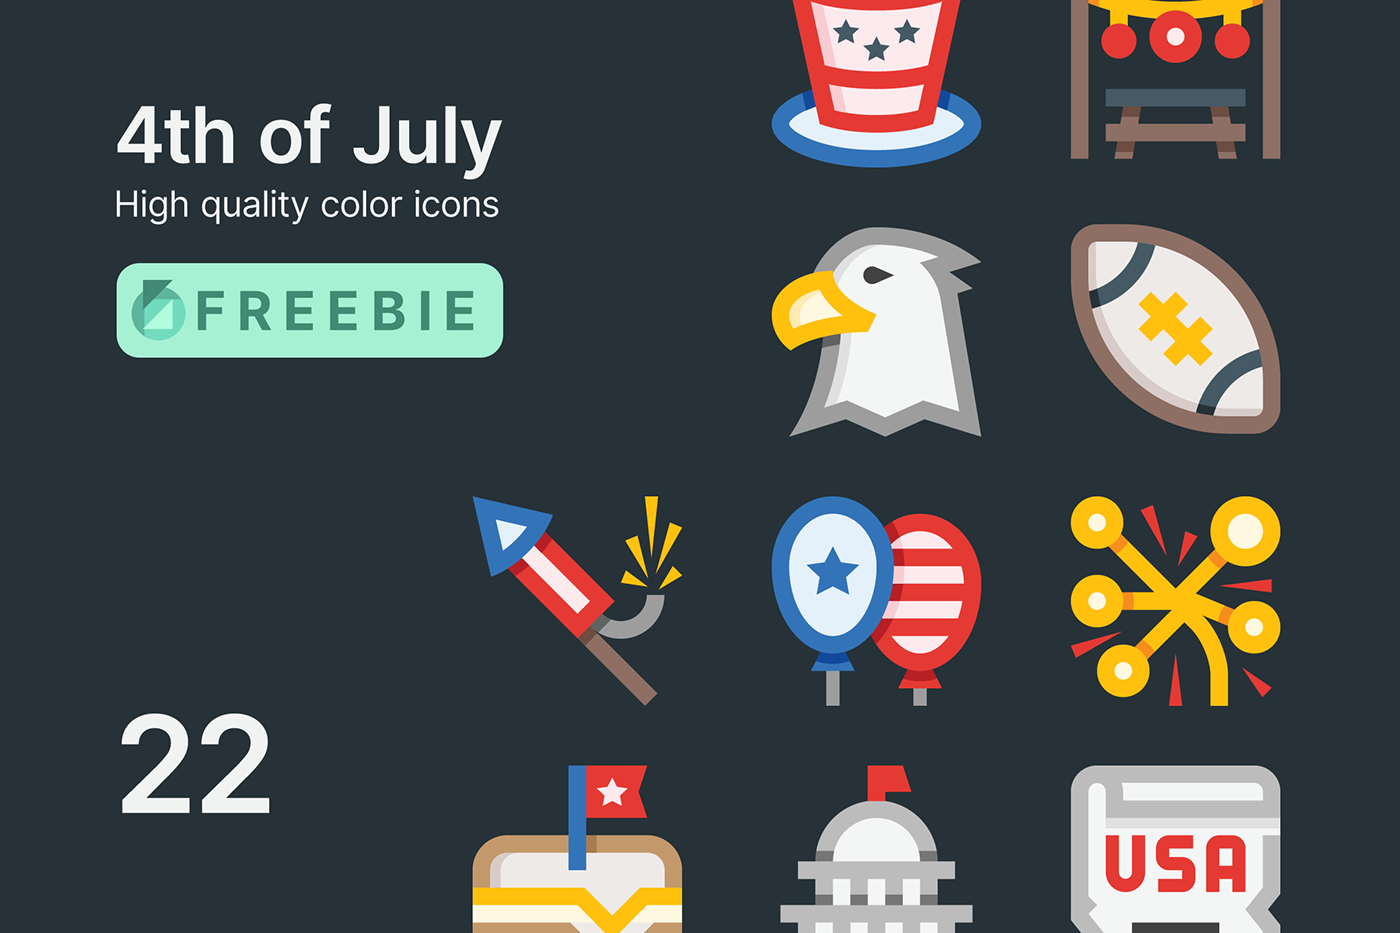 4th of July Event free freebie Holiday icons independence day national united states usa